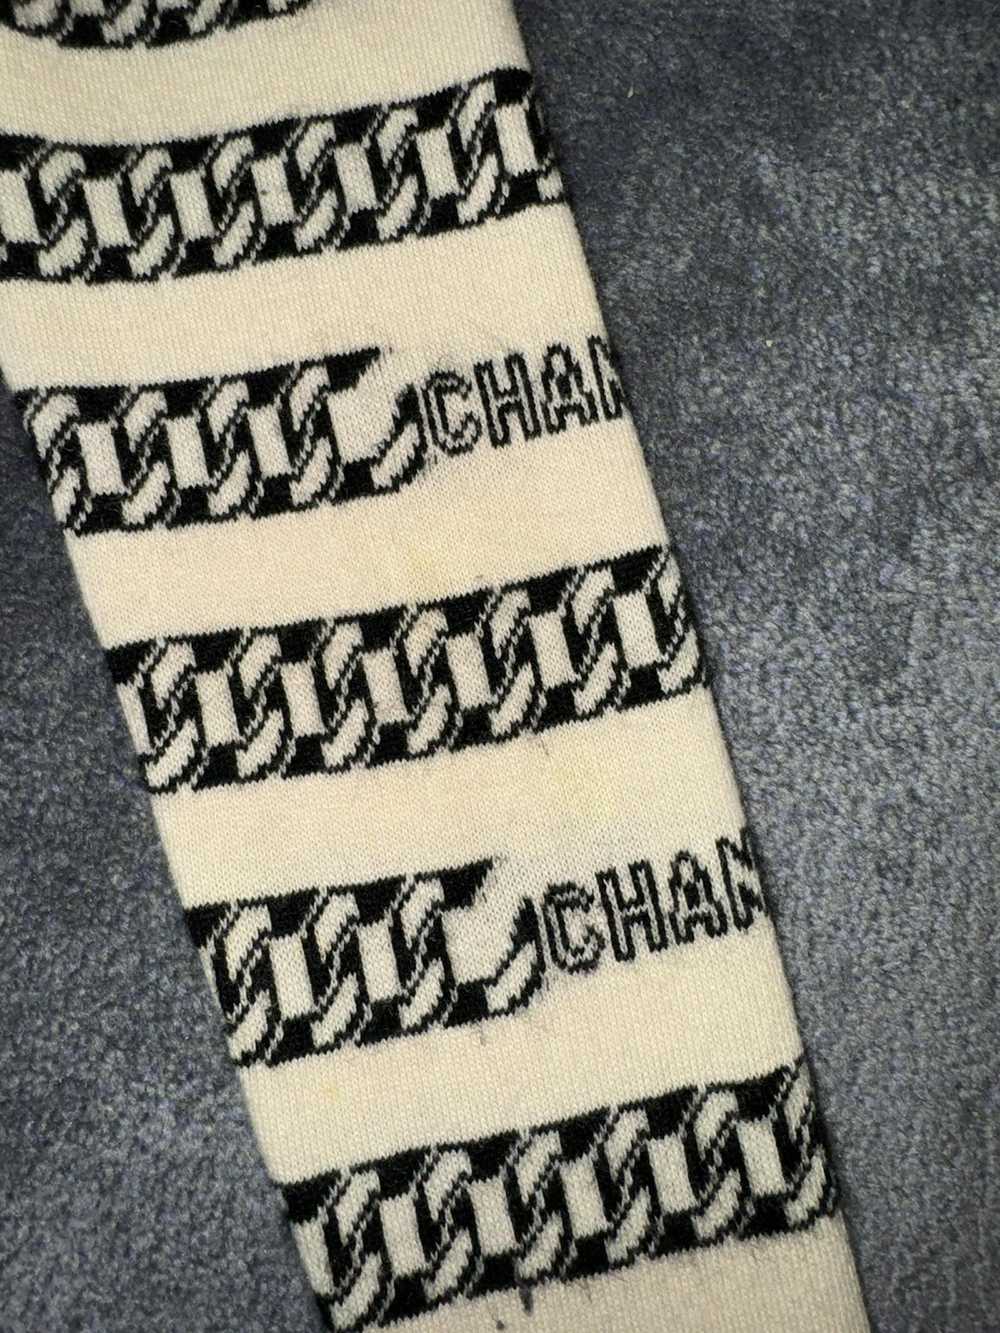 Chanel × Vintage 2001 Chanel By Karl Lagerfeld - image 6